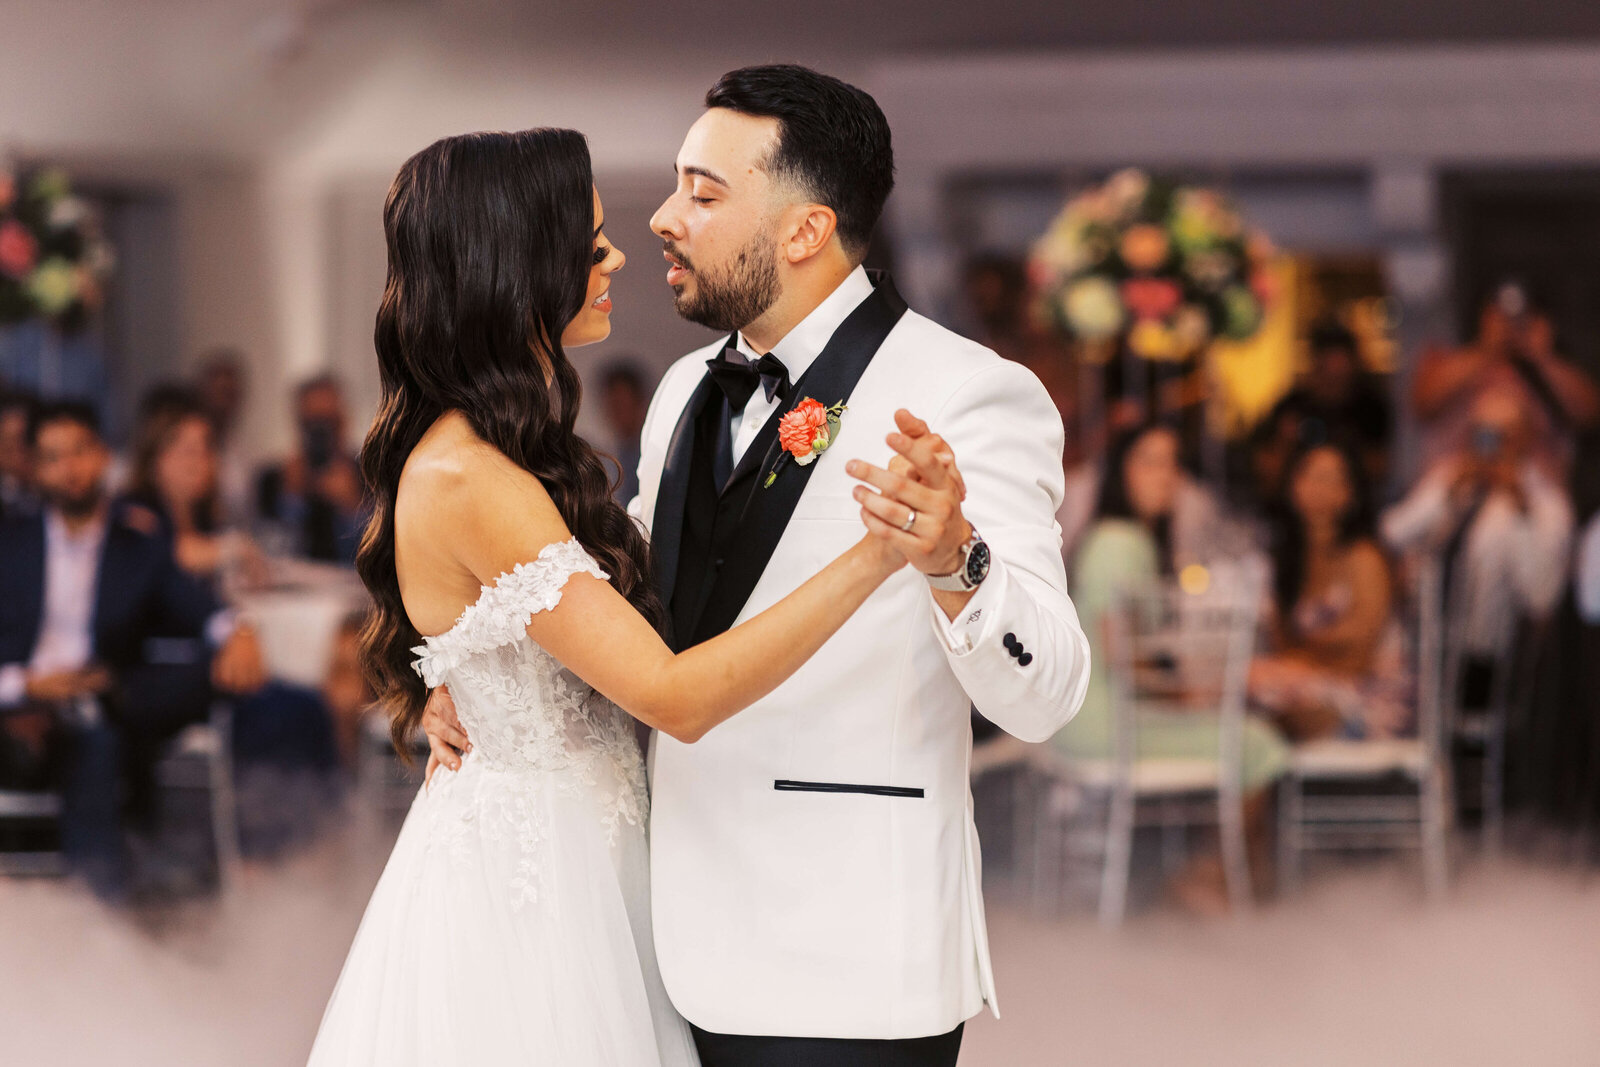 Husband and wife share their first dance in front of their family and friends.